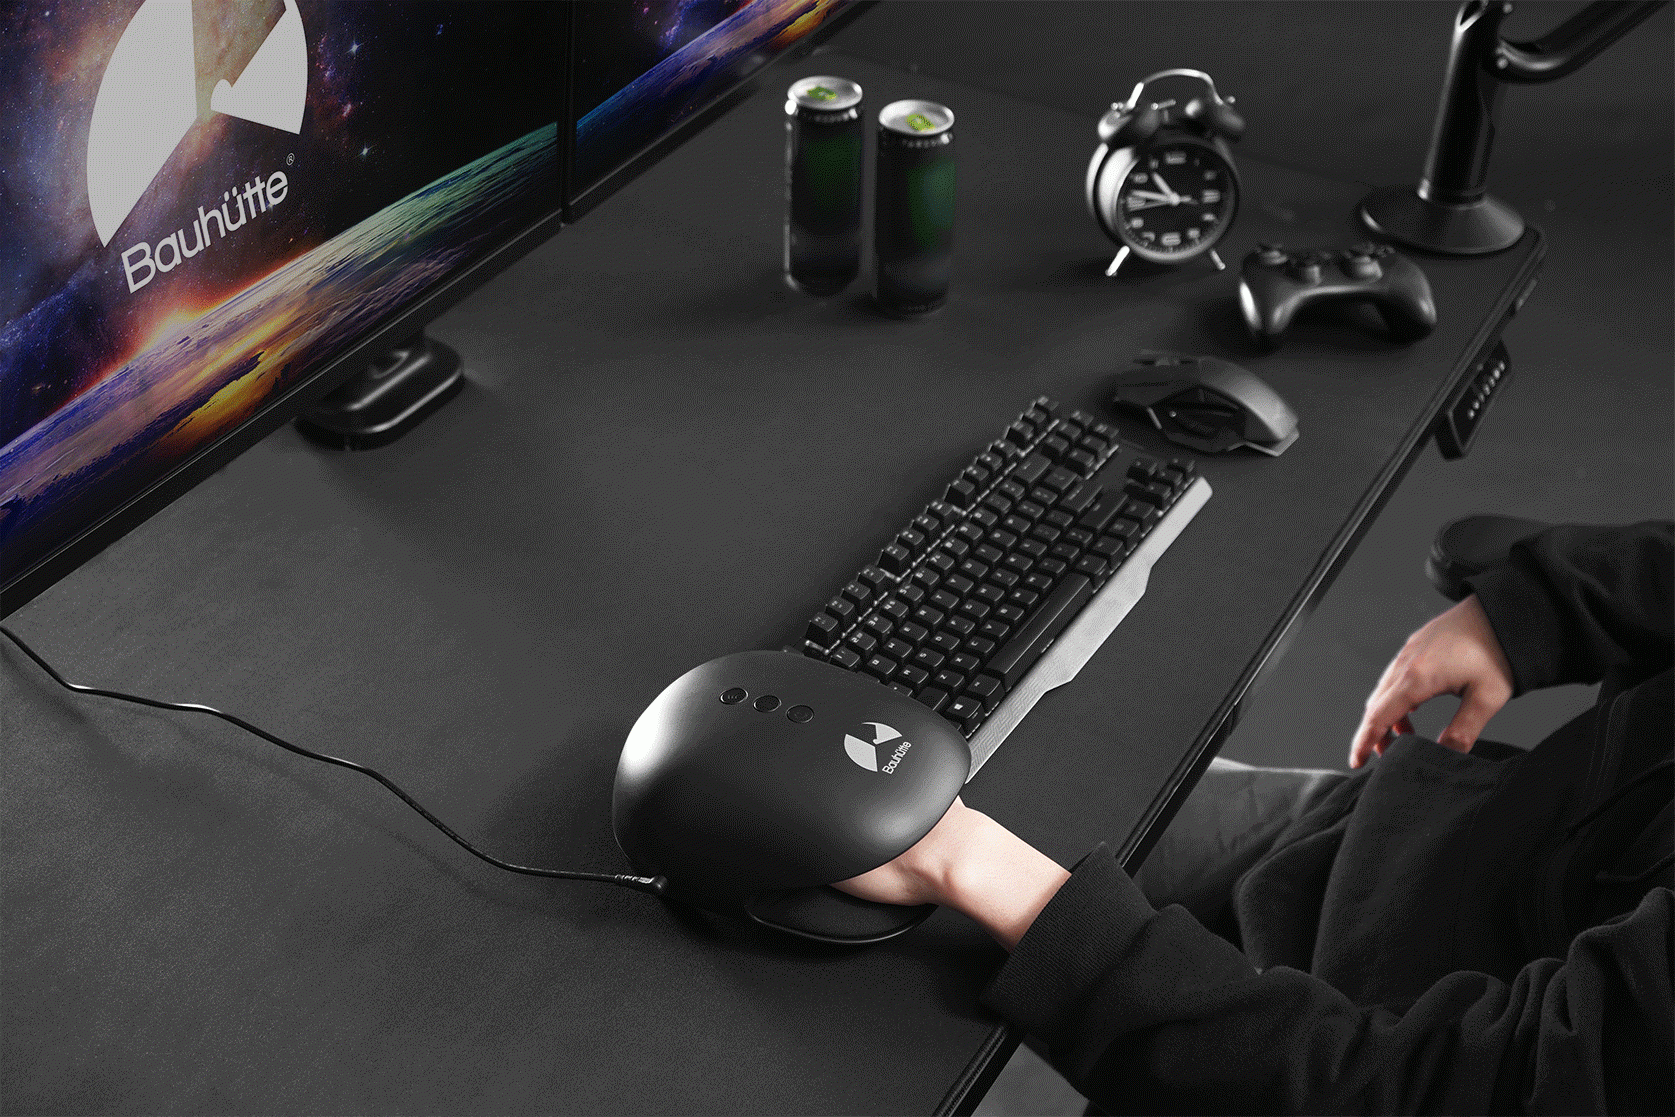 Japanese company creates hand massager for gamers